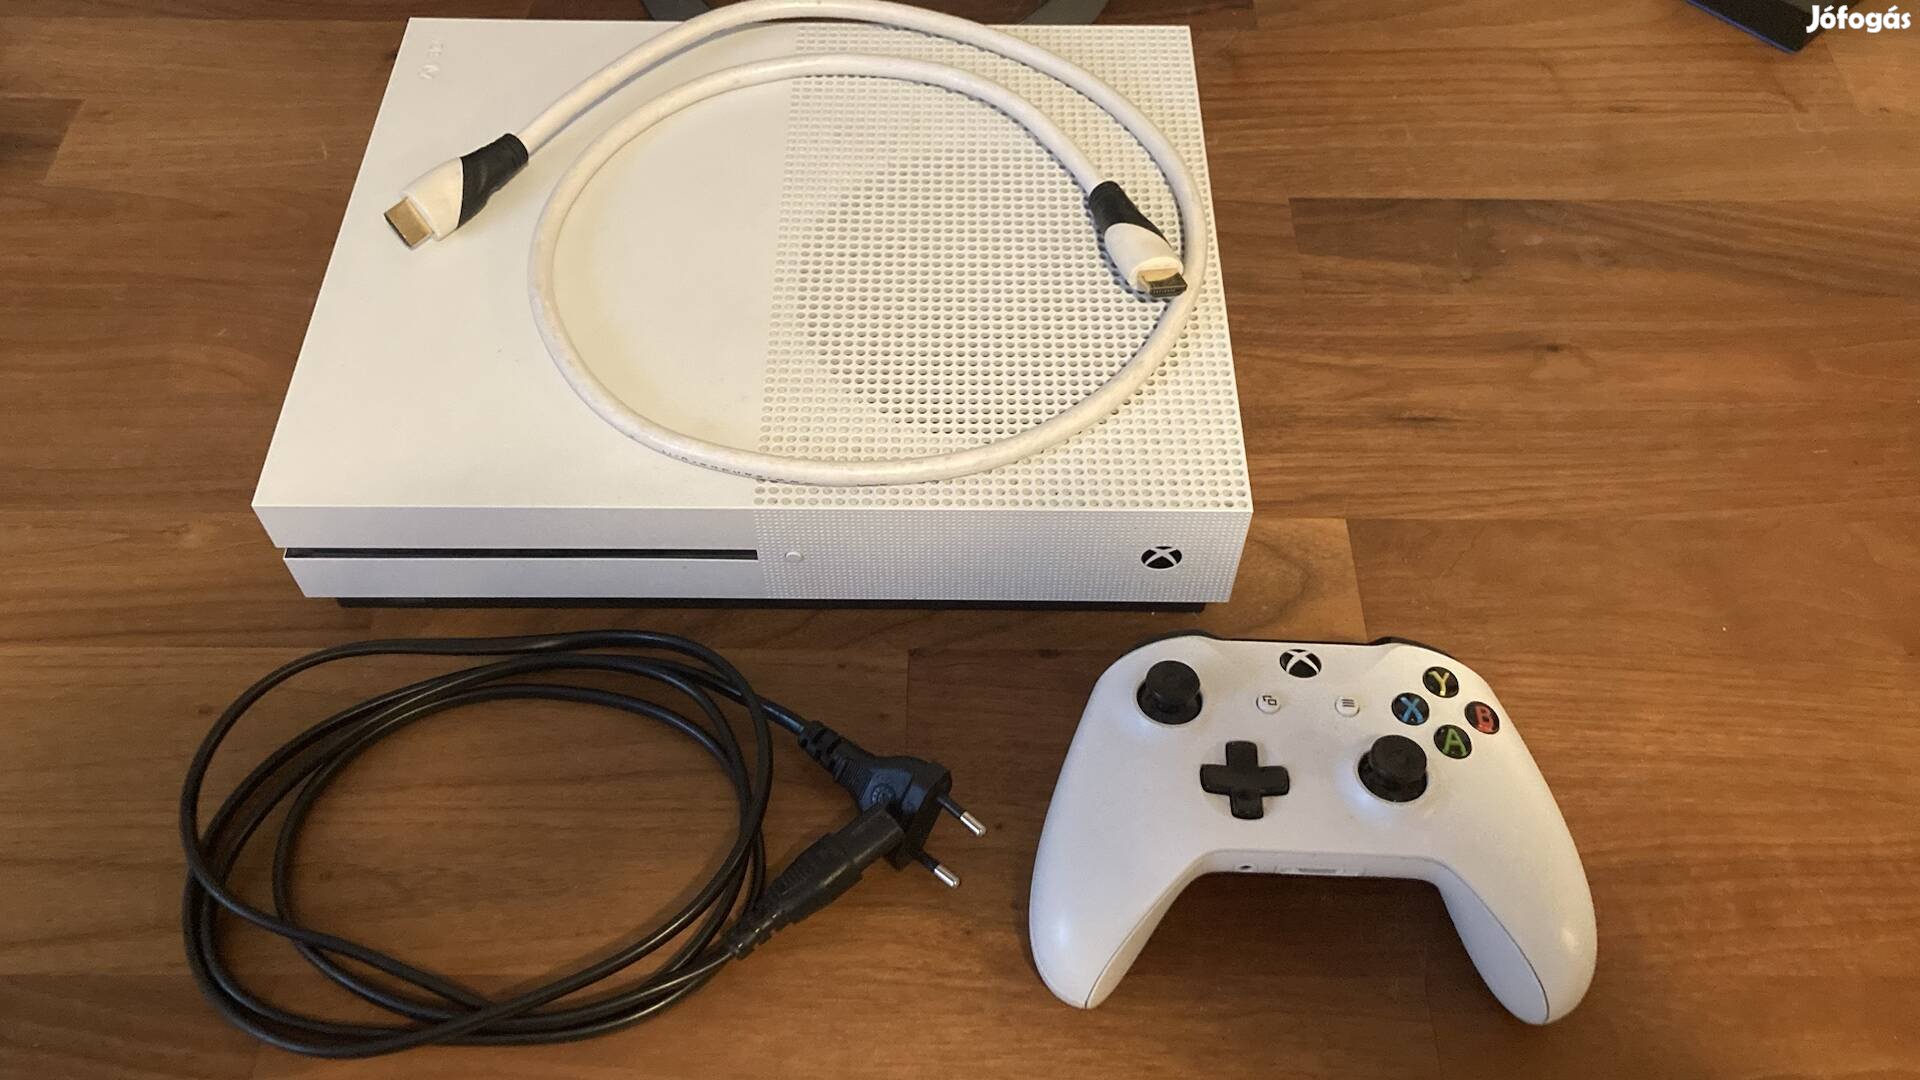 Xbox one s 500 gb + controller